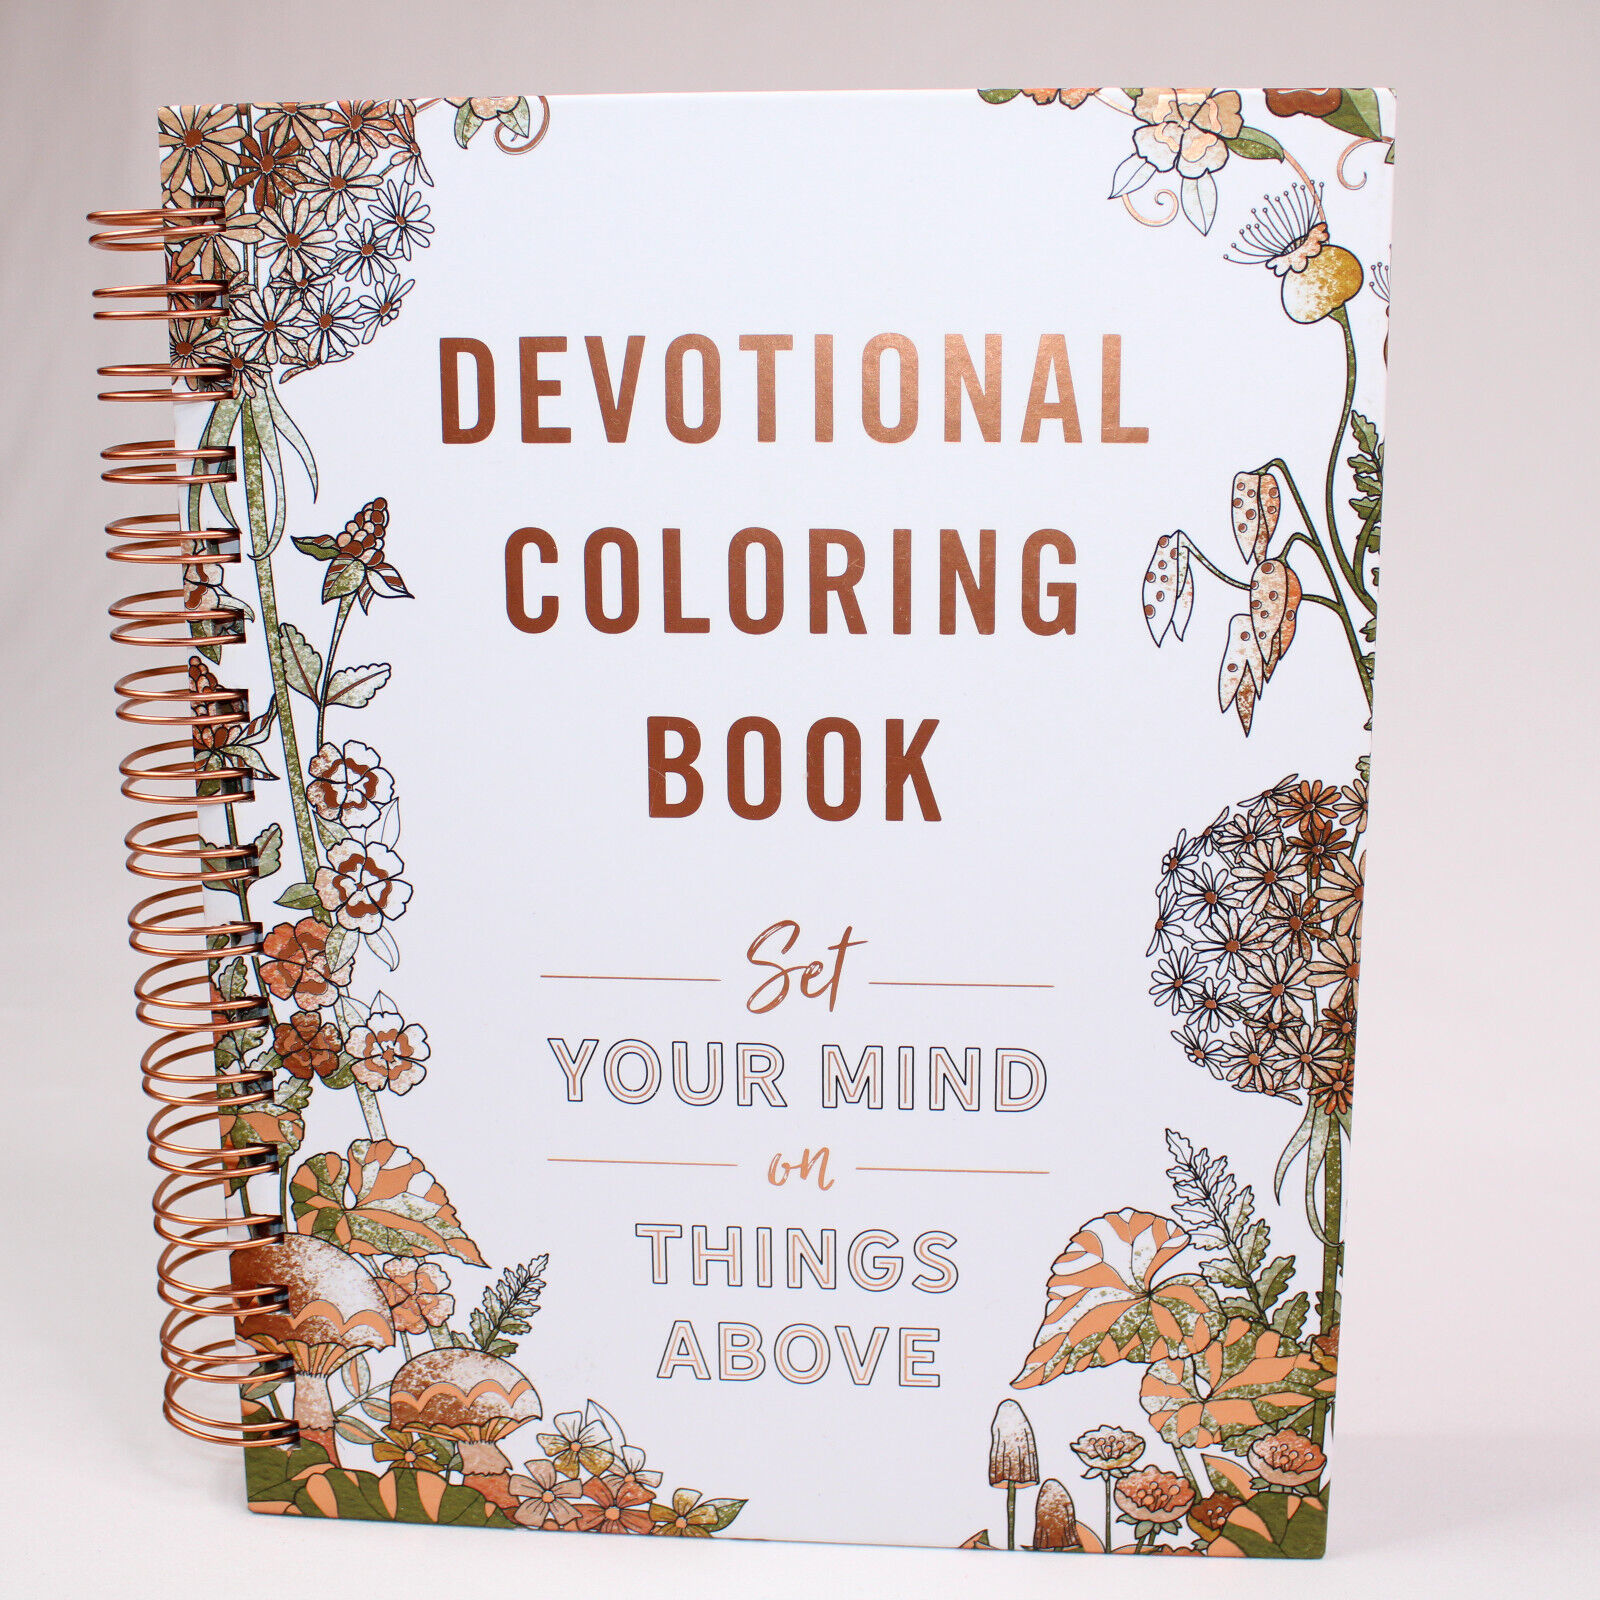 Devotional Coloring Book Bible Verses And Color Pages Set Your Mind On God VG